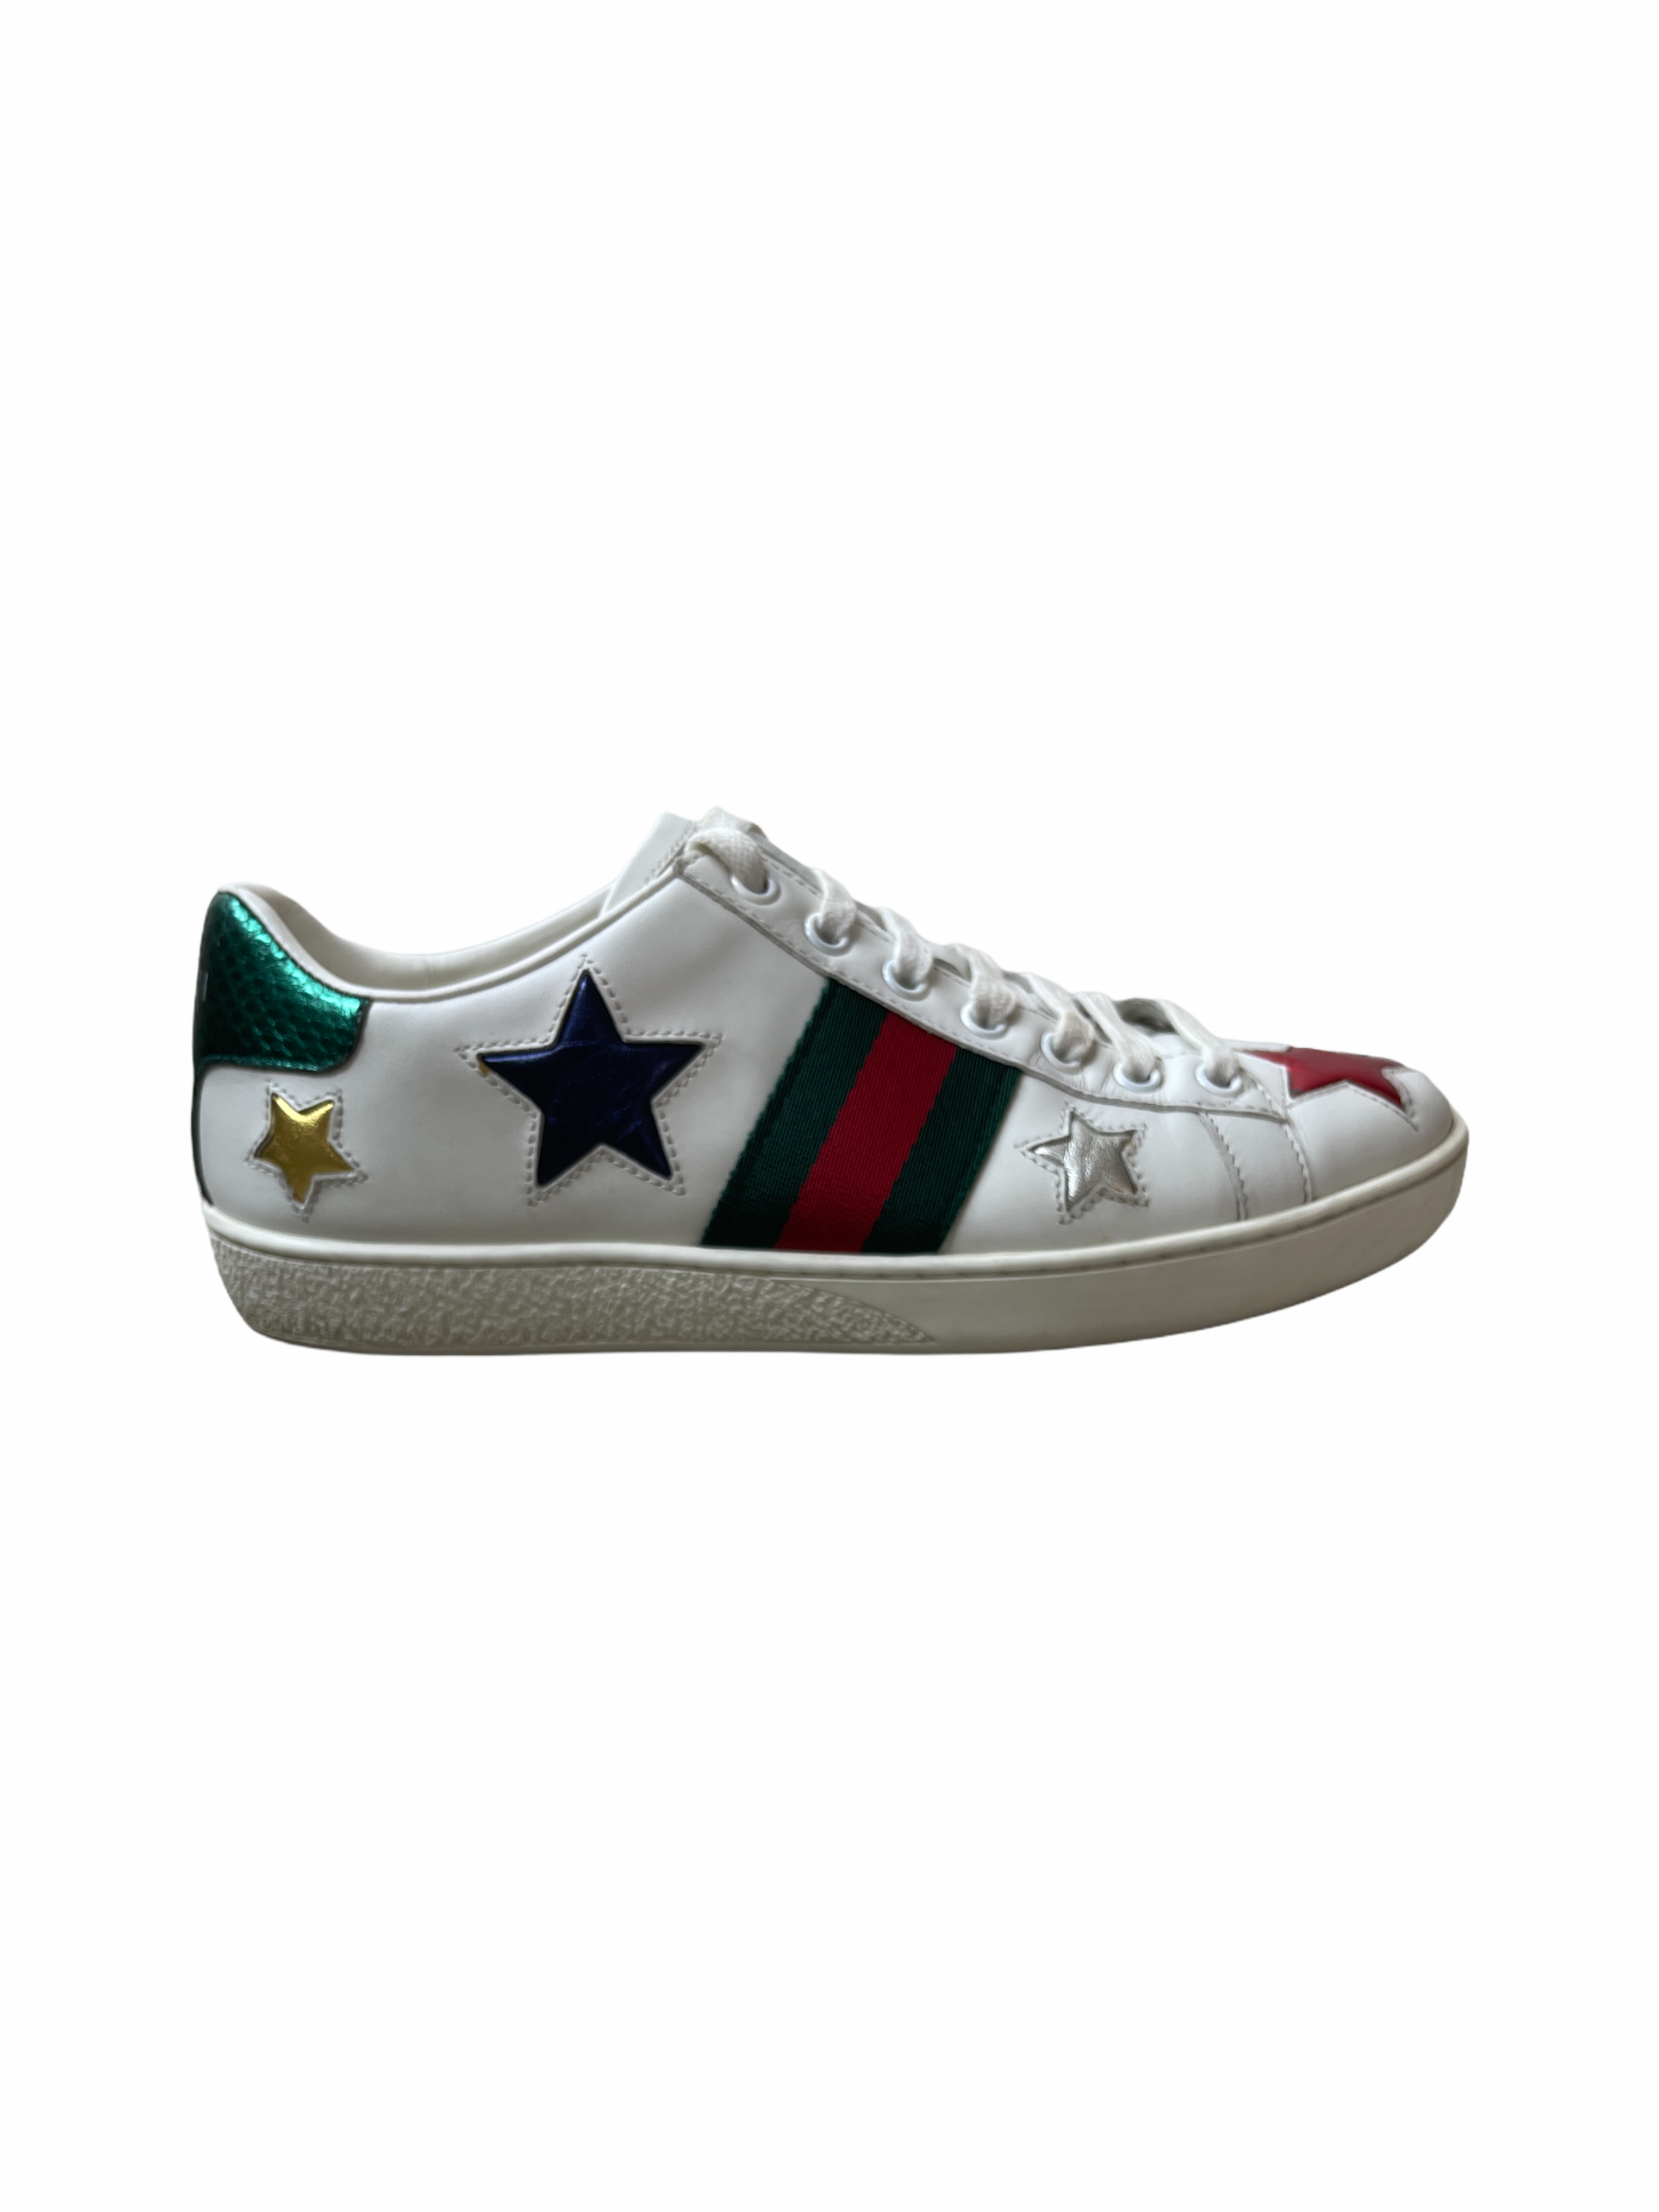 Pre Loved Gucci sneakers size 37 EU - The Luxury Flavor